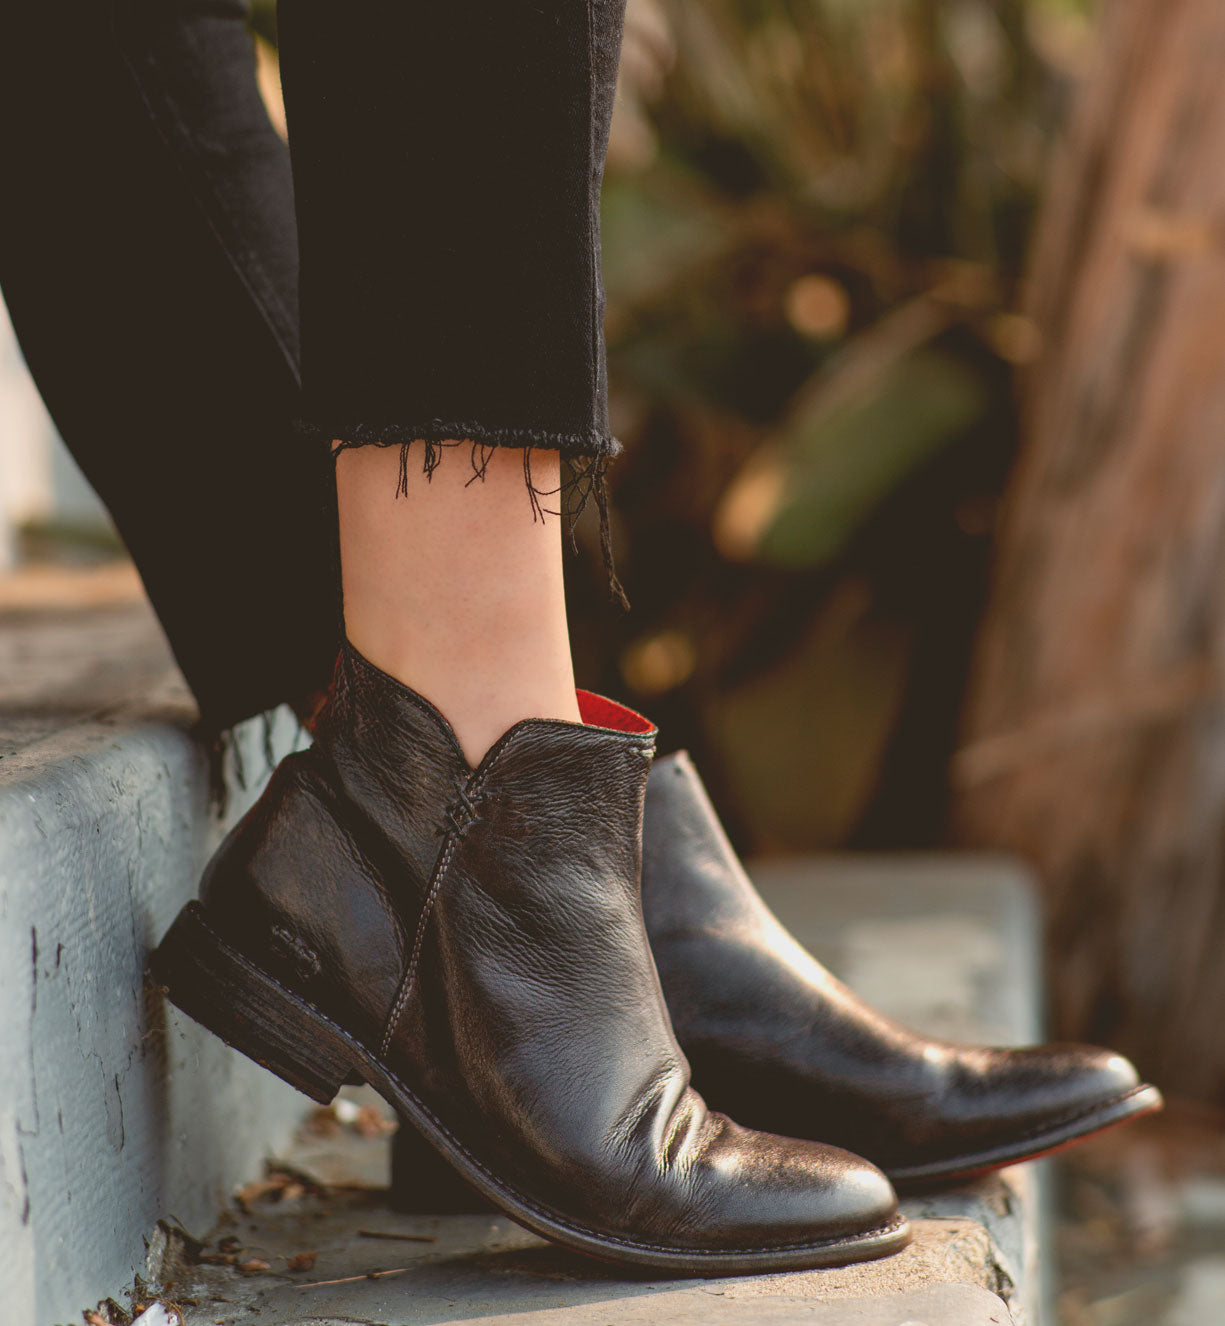 A woman wearing the Yurisa black leather chelsea boots by Bed Stu.